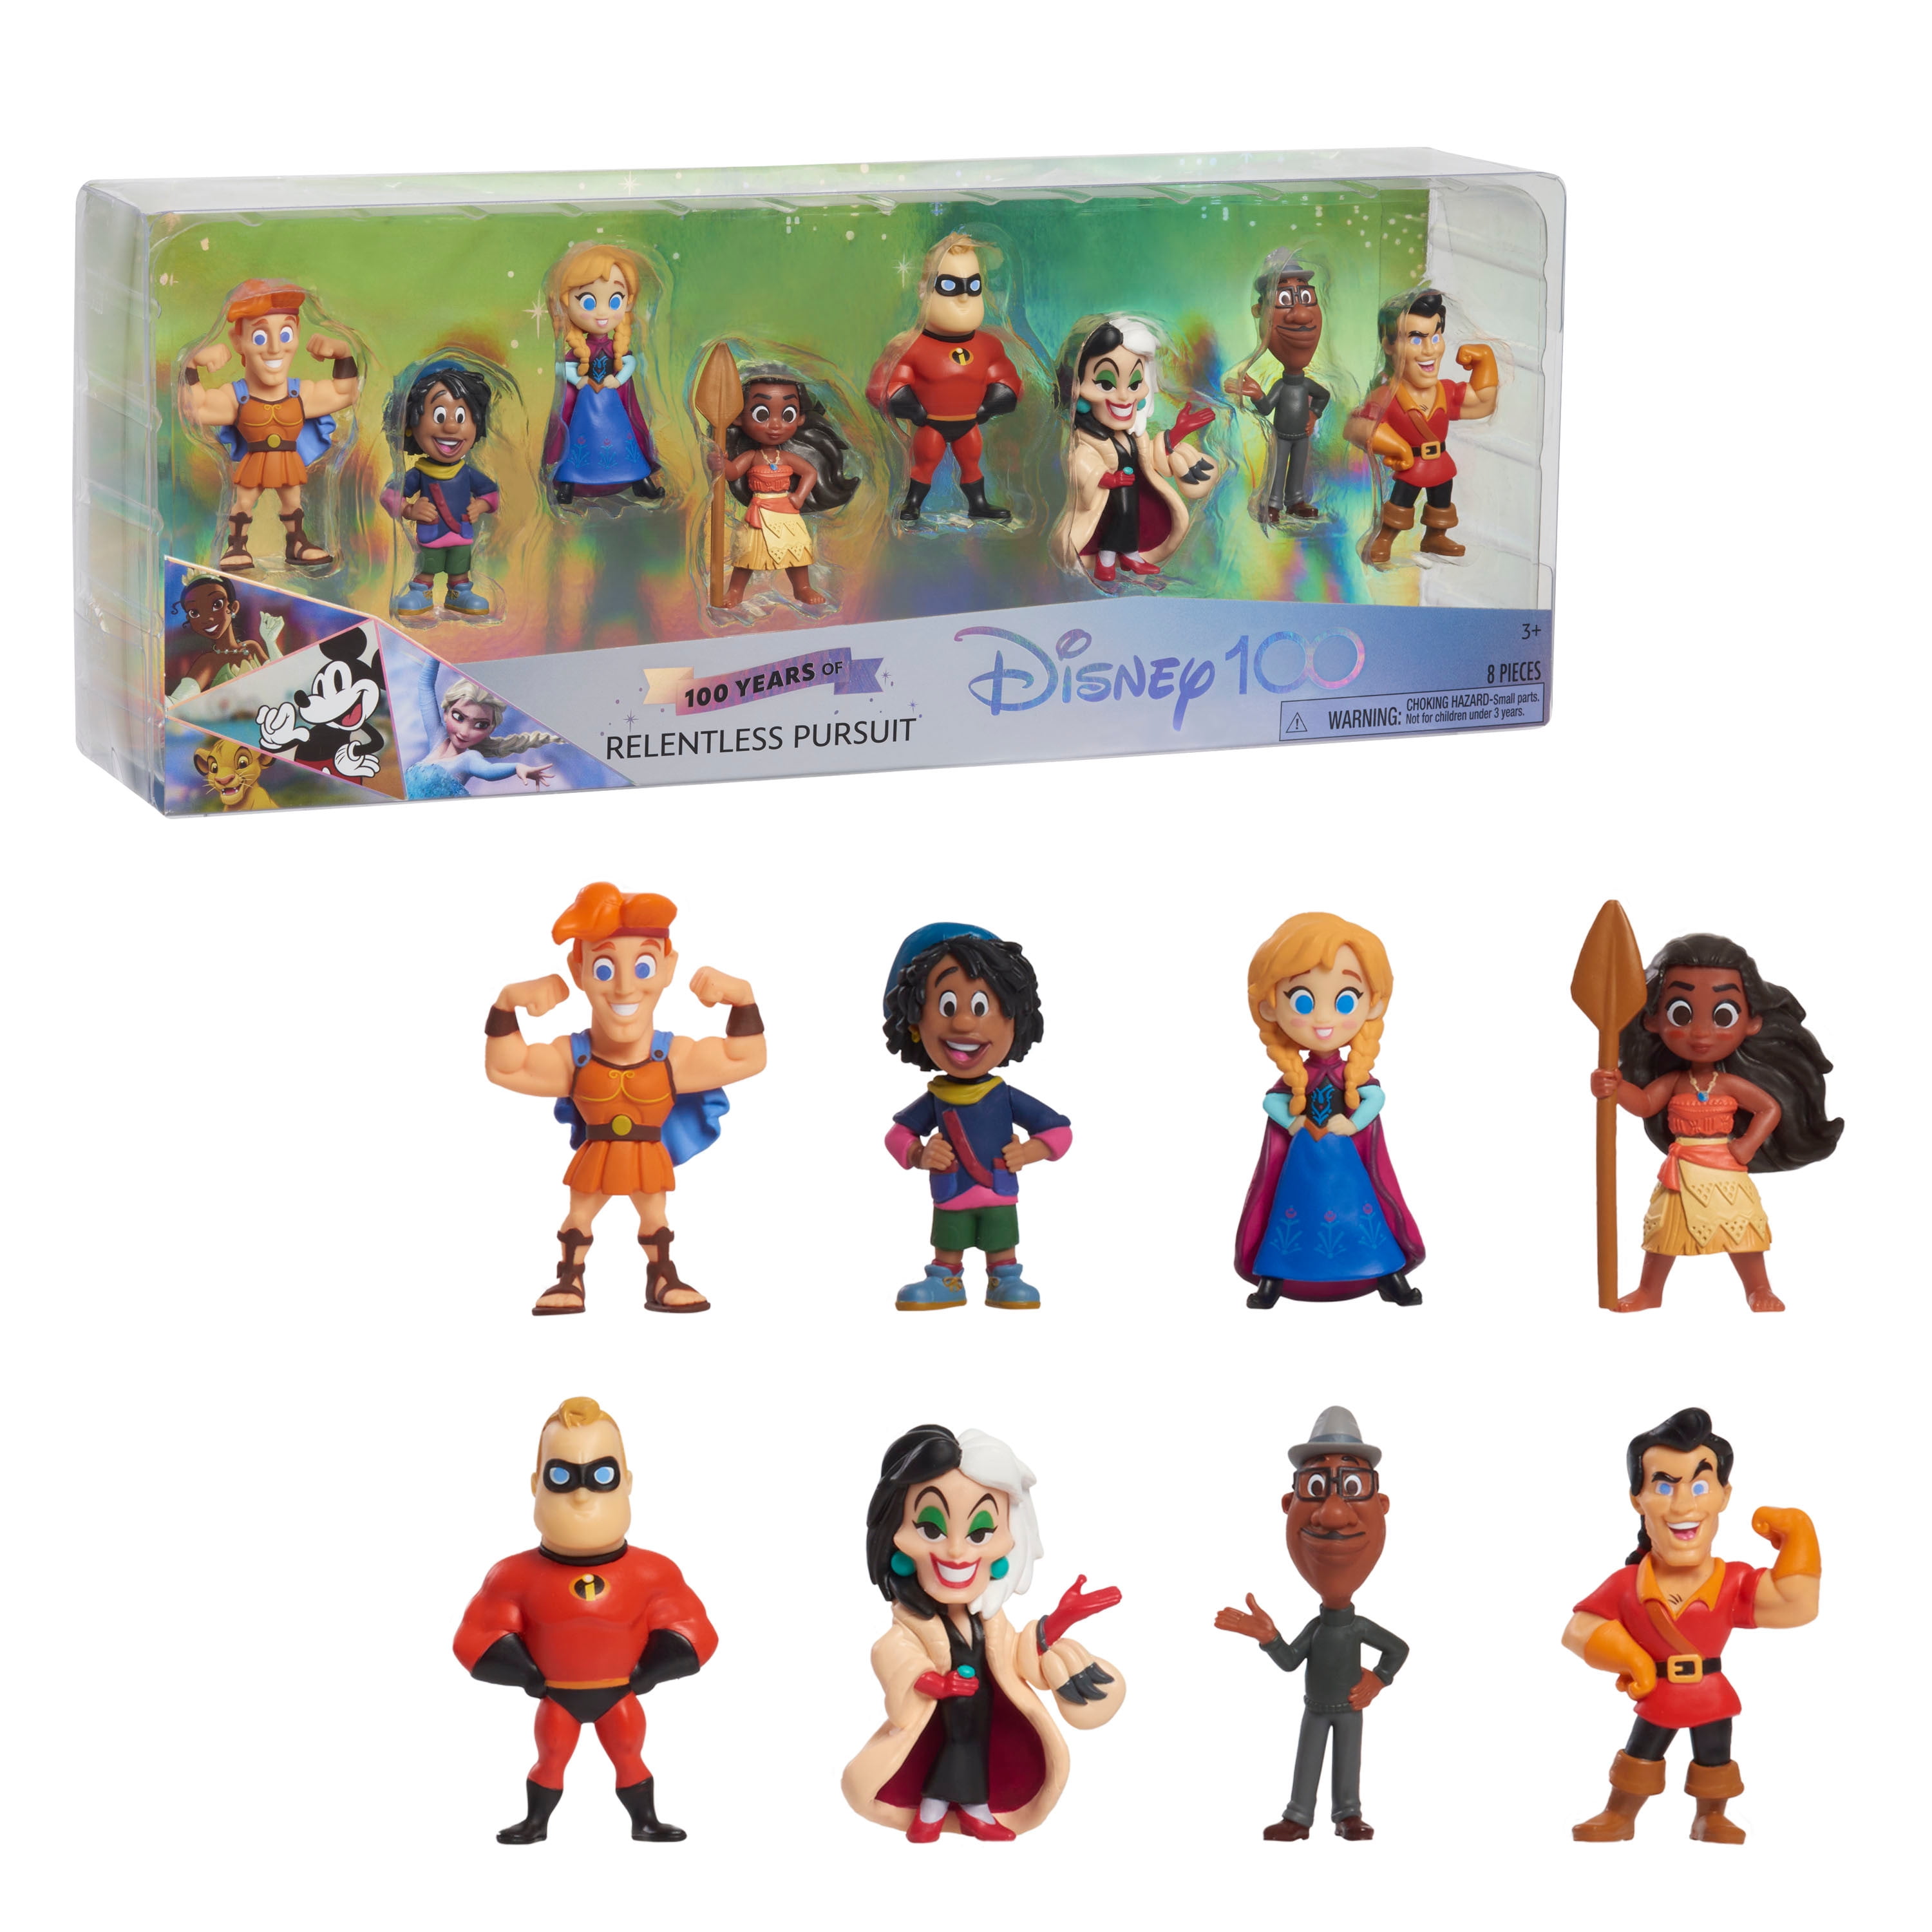 Disney100 Years of Relentless Pursuit Celebration Collection Limited  Edition 8-piece Figure Pack, Kids Toys for Ages 3 up 